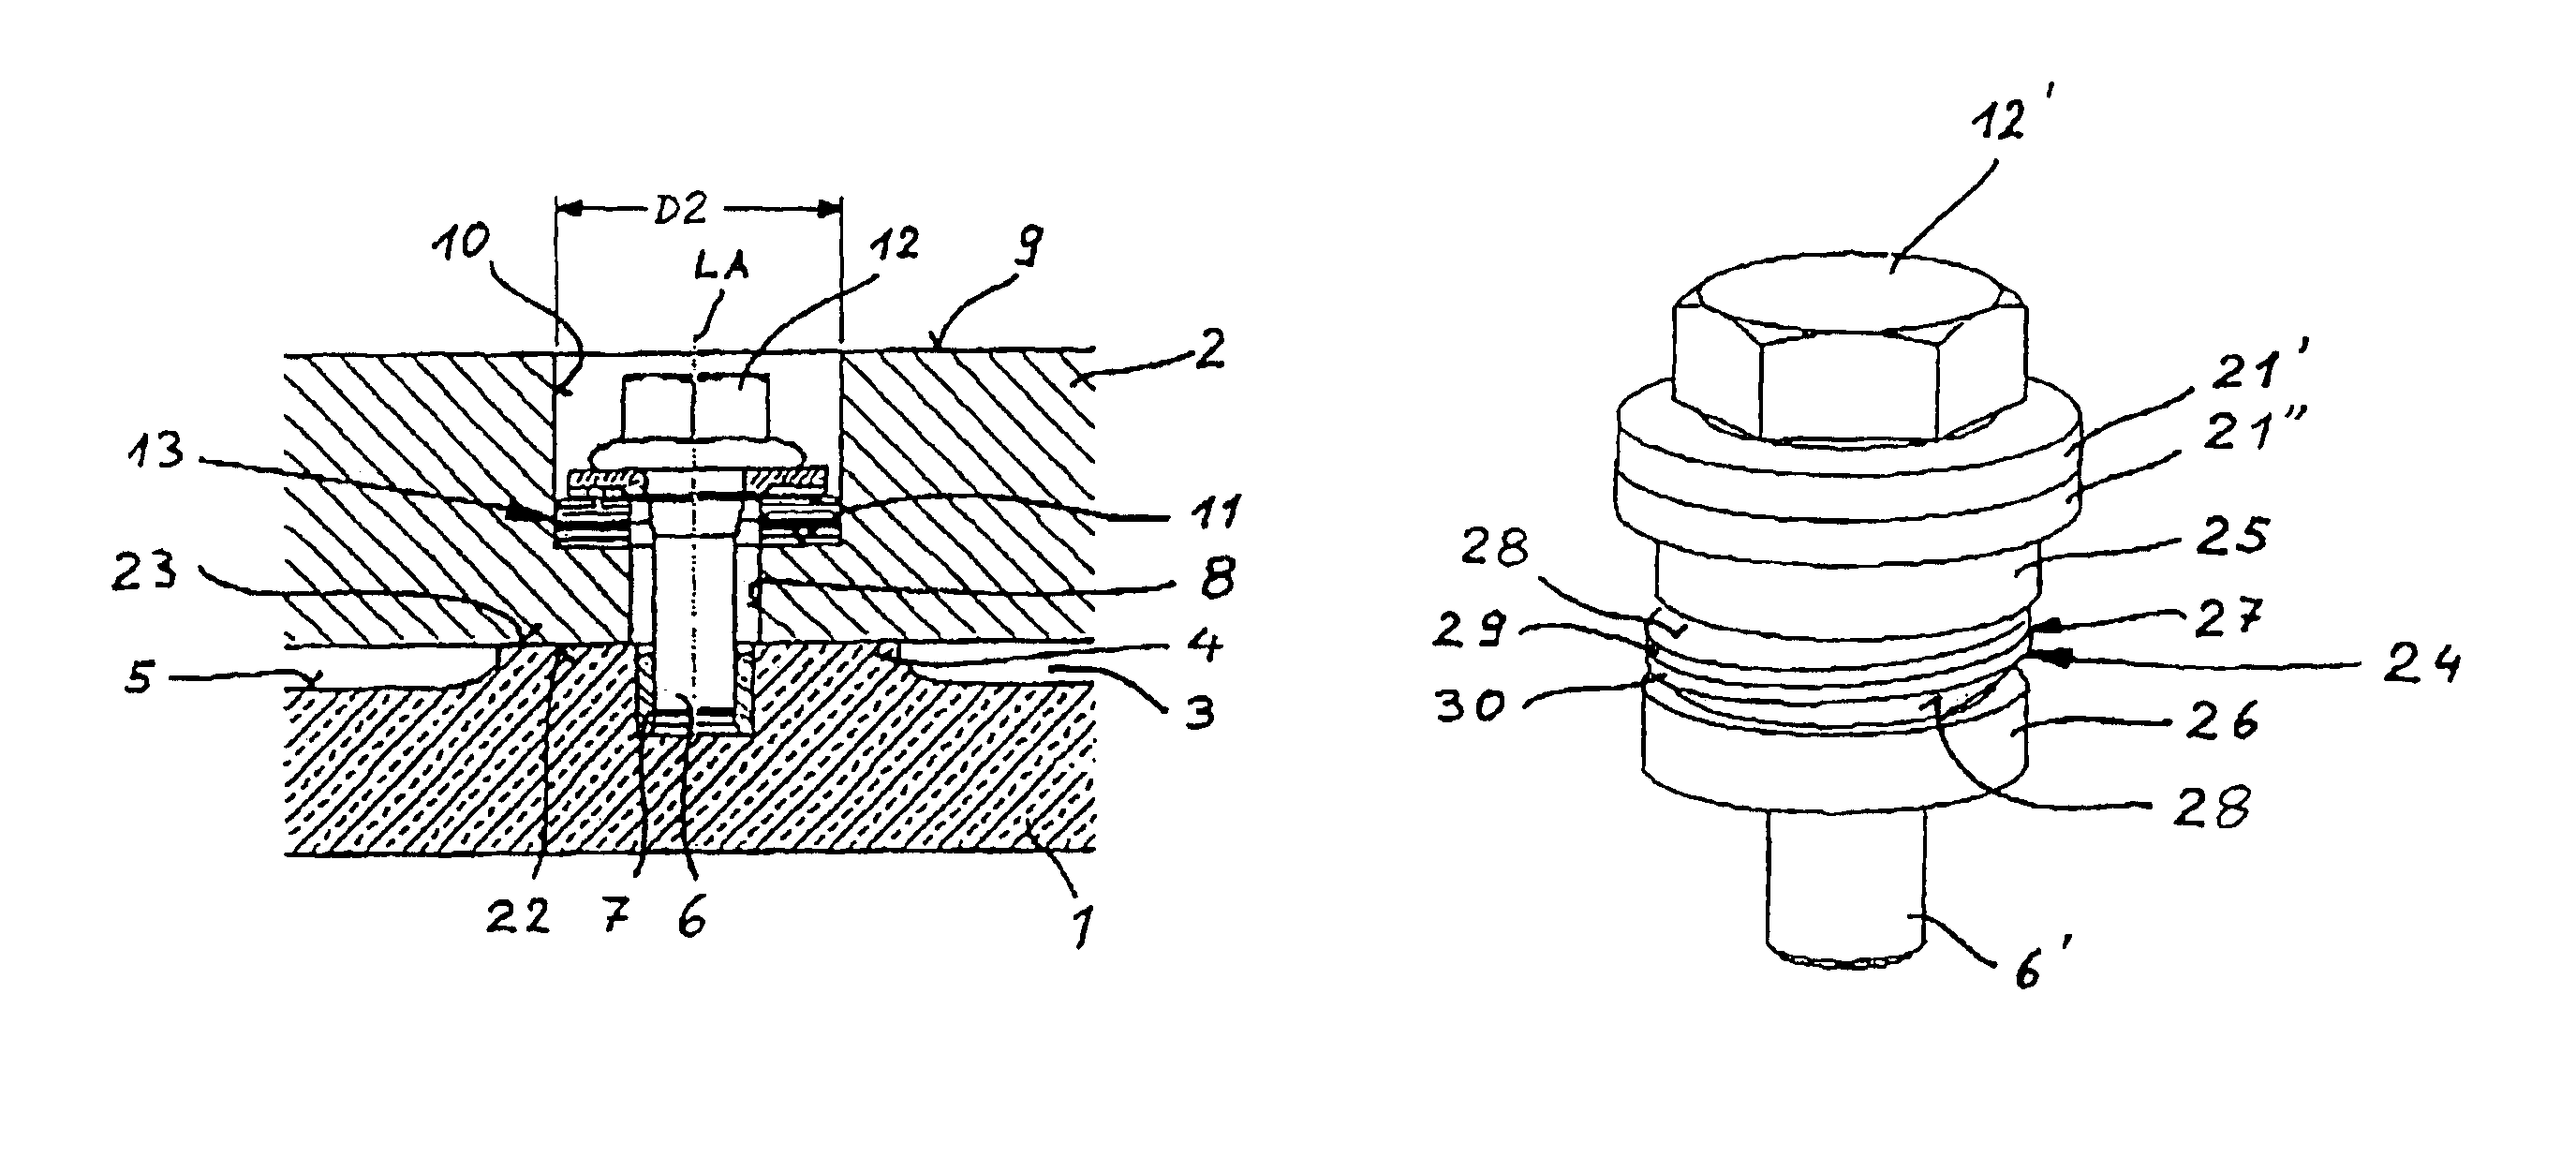 Liquid-cooled mold for the continuous casting of metals